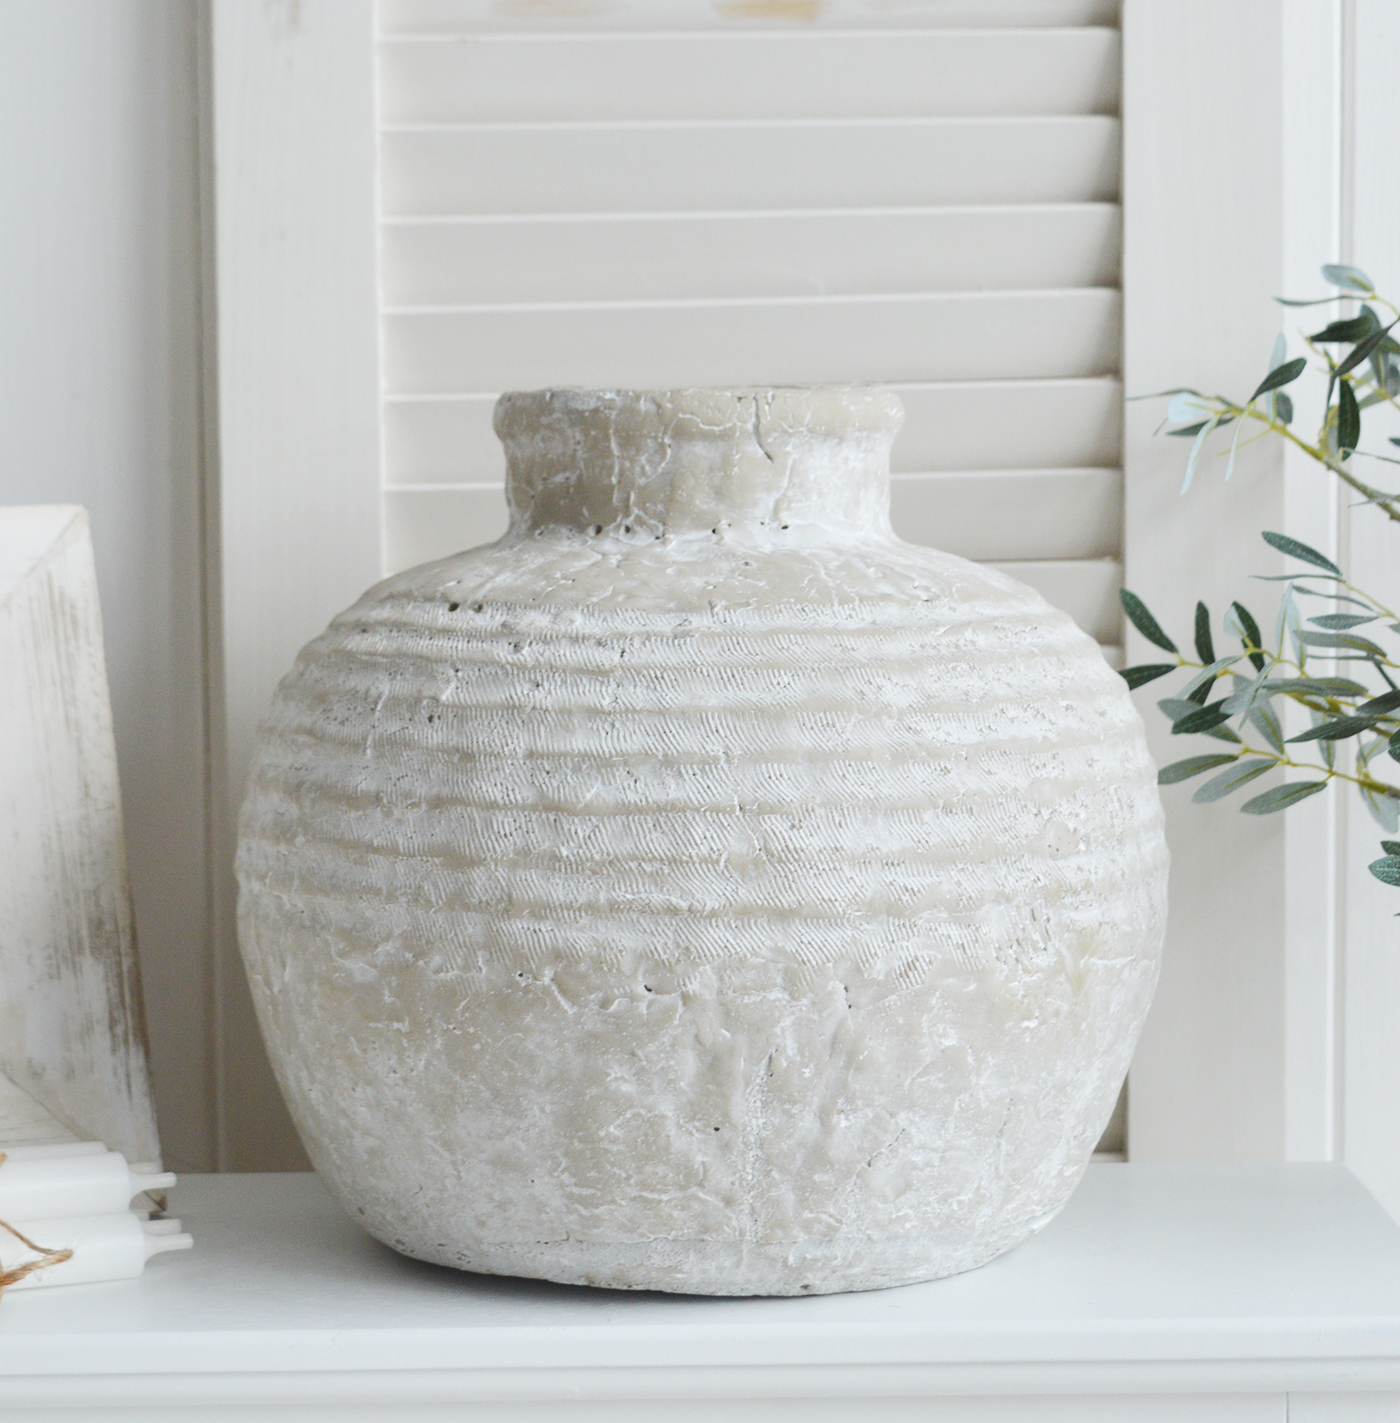 Newfane large stone vase, ideal for styling in a New England styled homes for coastal, country and modern farmhouse interiors, complementing the furniture